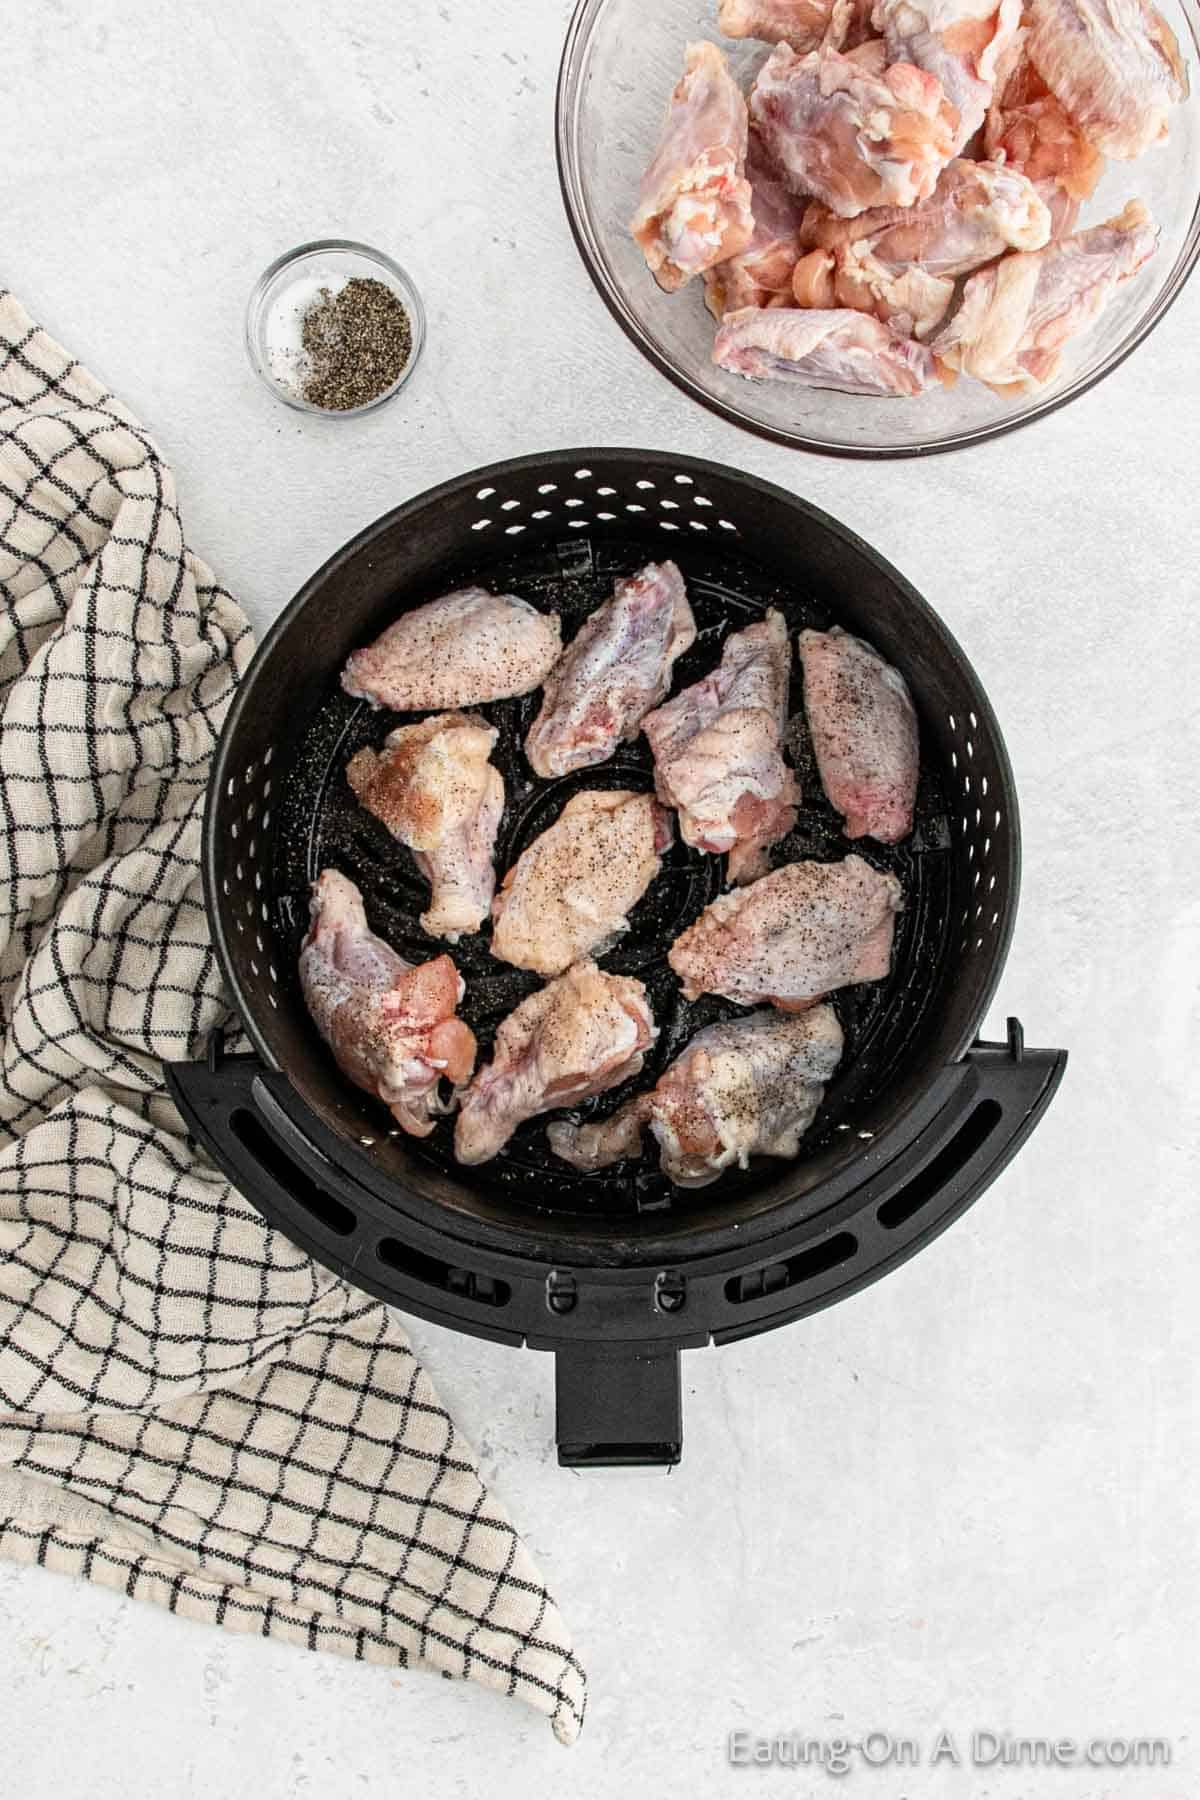 Placing chicken wings in the air fryer basket with a bowl of uncooked chicken wings on the side and a bowl of salt and pepper